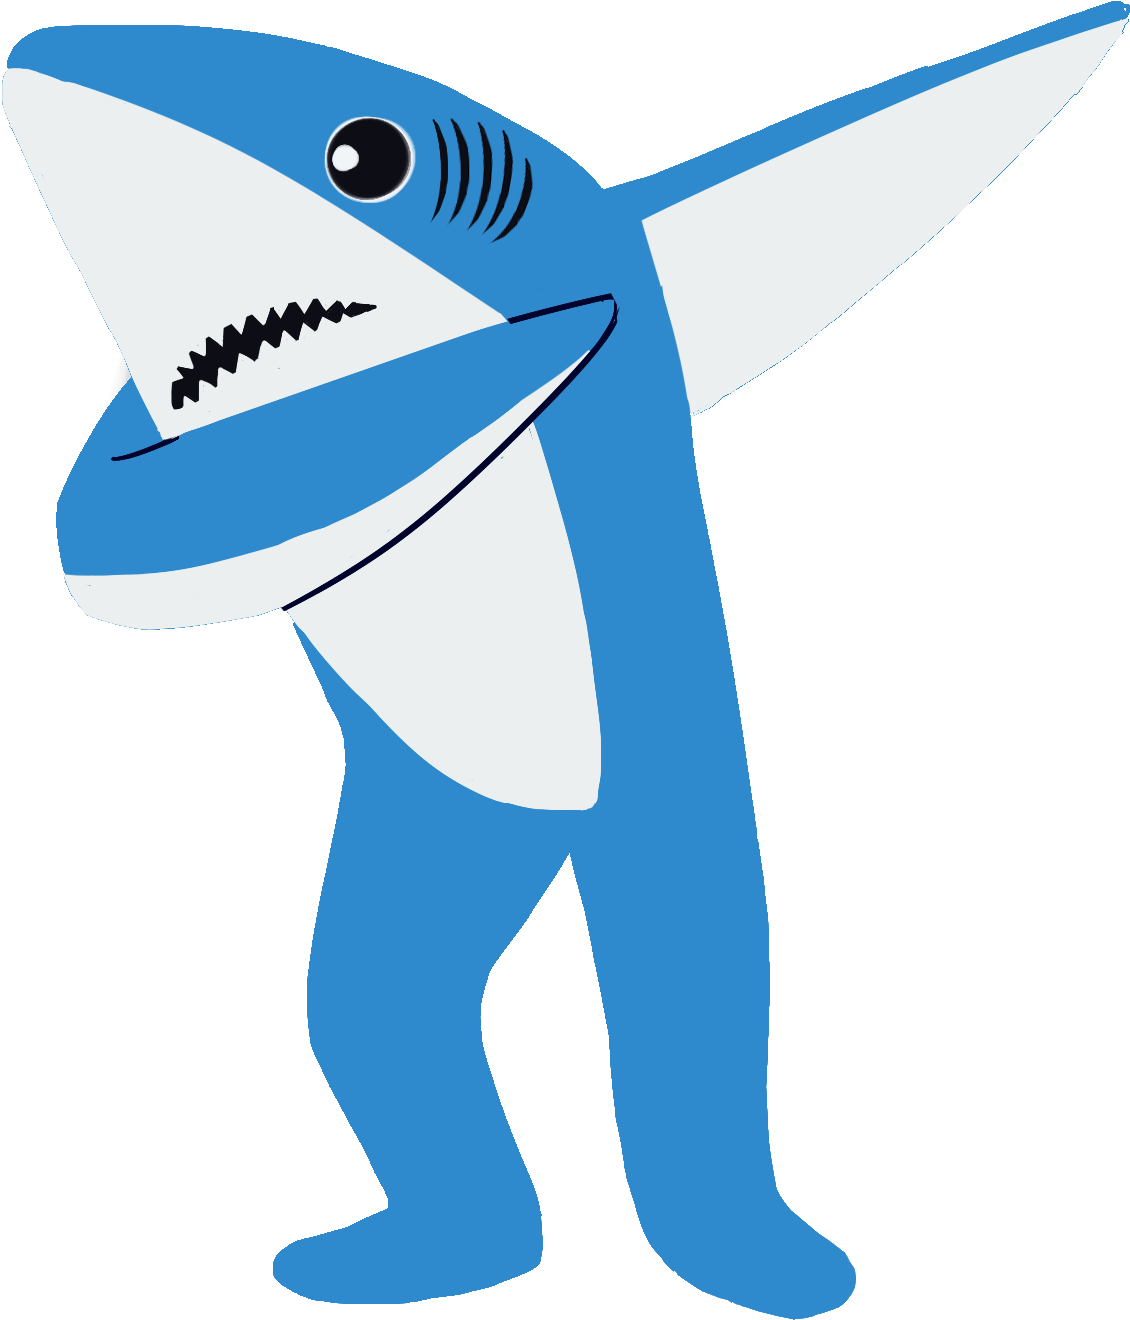 Dab To The Left Super Bowl Xlix Halftime Left Shark - Katy Perry Shark Png (1500x1500)